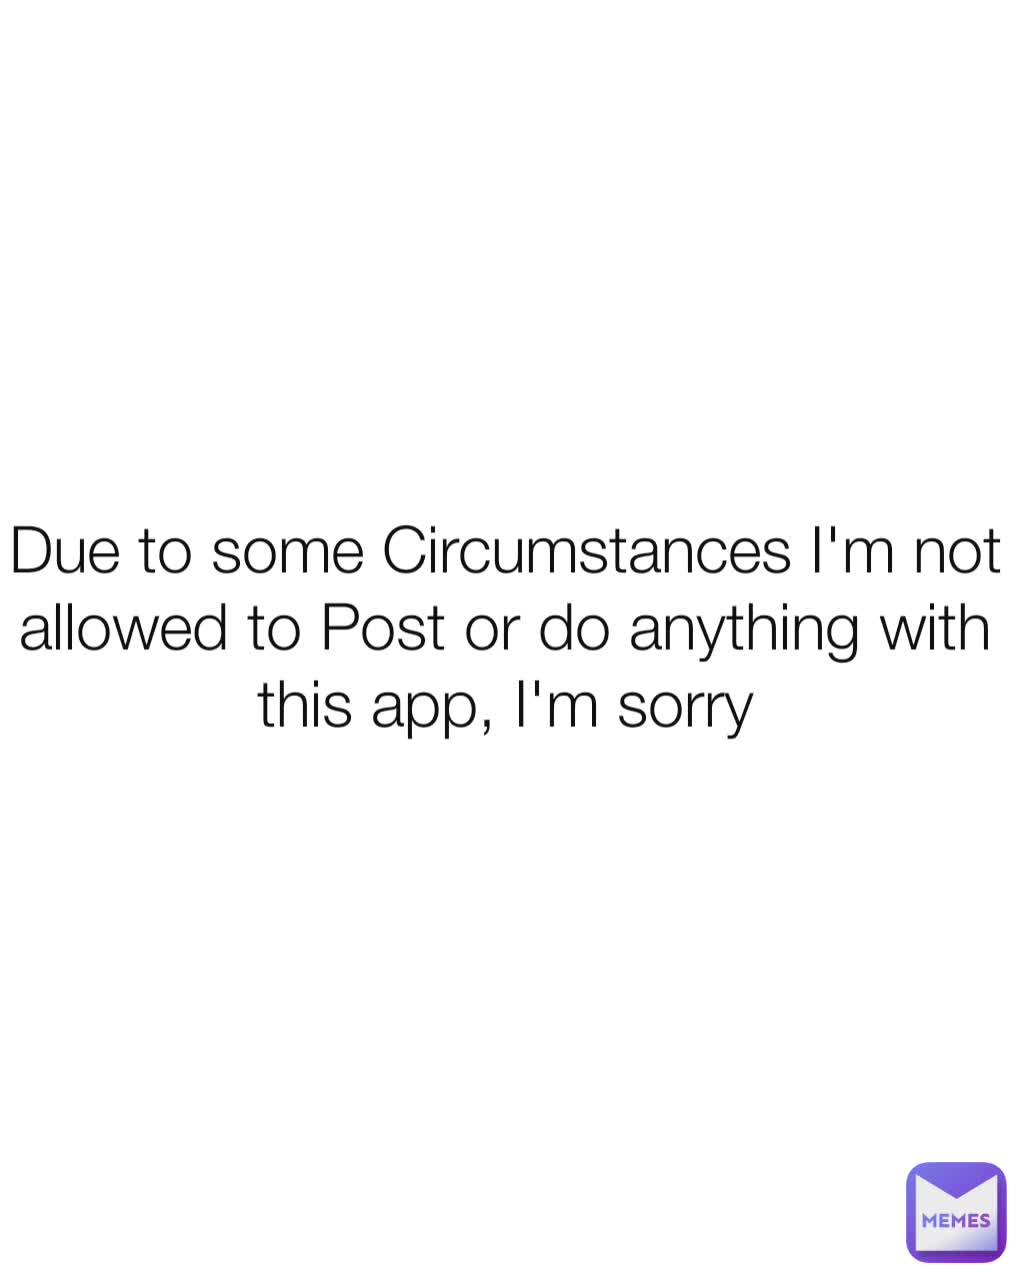 Due to some Circumstances I'm not allowed to Post or do anything with this app, I'm sorry